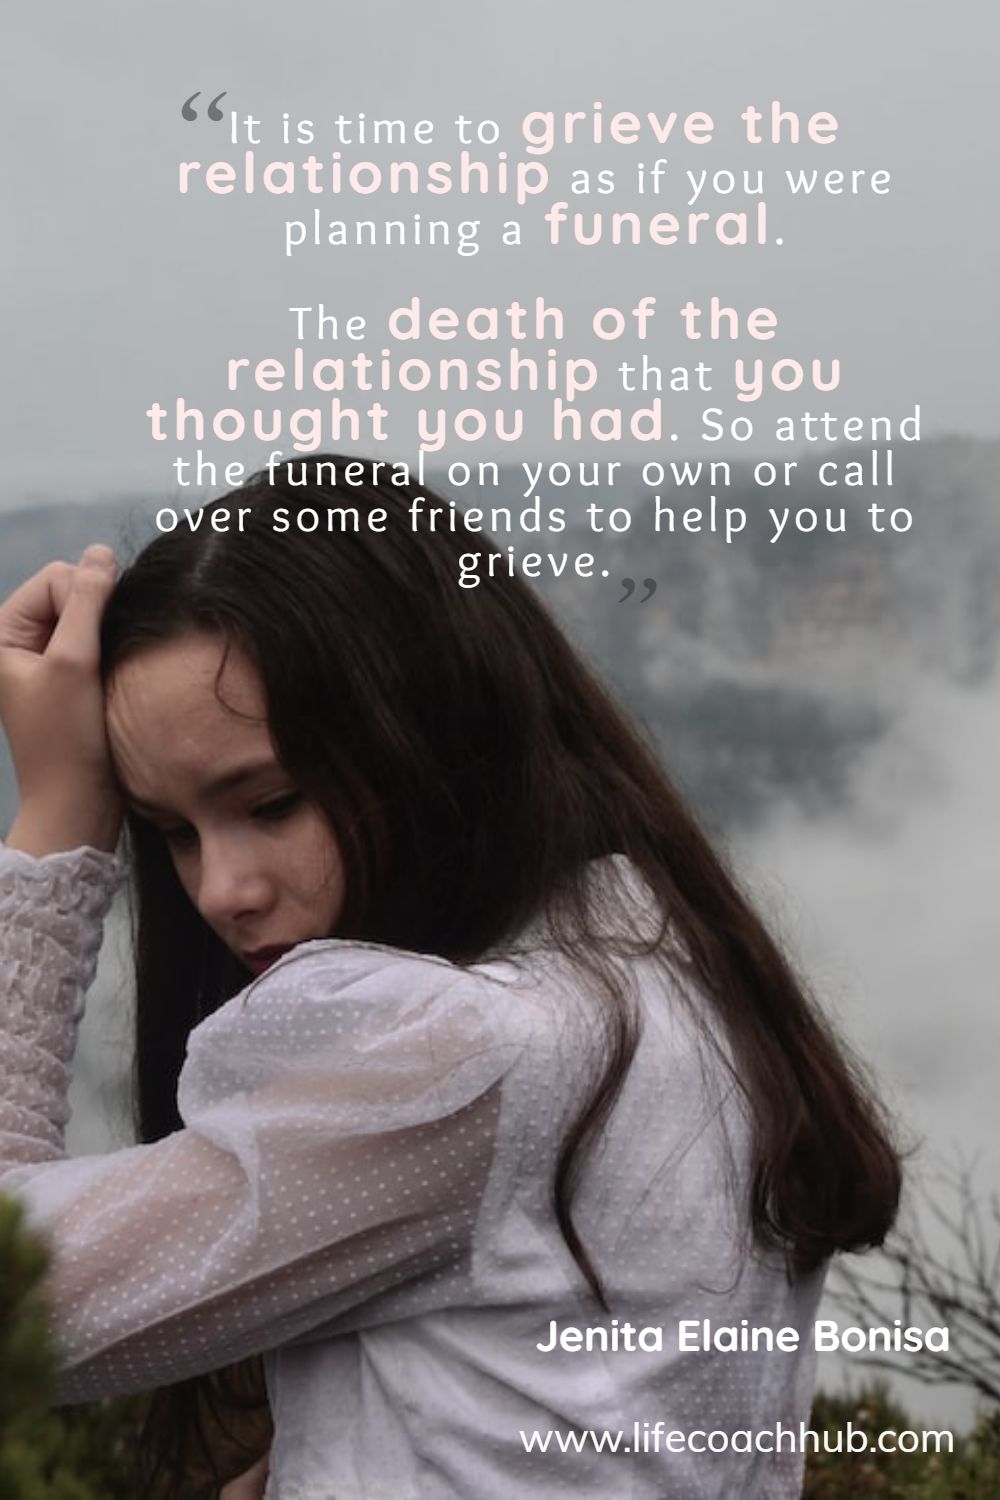 It is time to grieve the relationship as if you were planning a funeral. The death of the relationship that you thought you had. So attend the funeral on your own or call over some friends to help you to grieve. Jenita Elaine Bonisa Coaching Quote